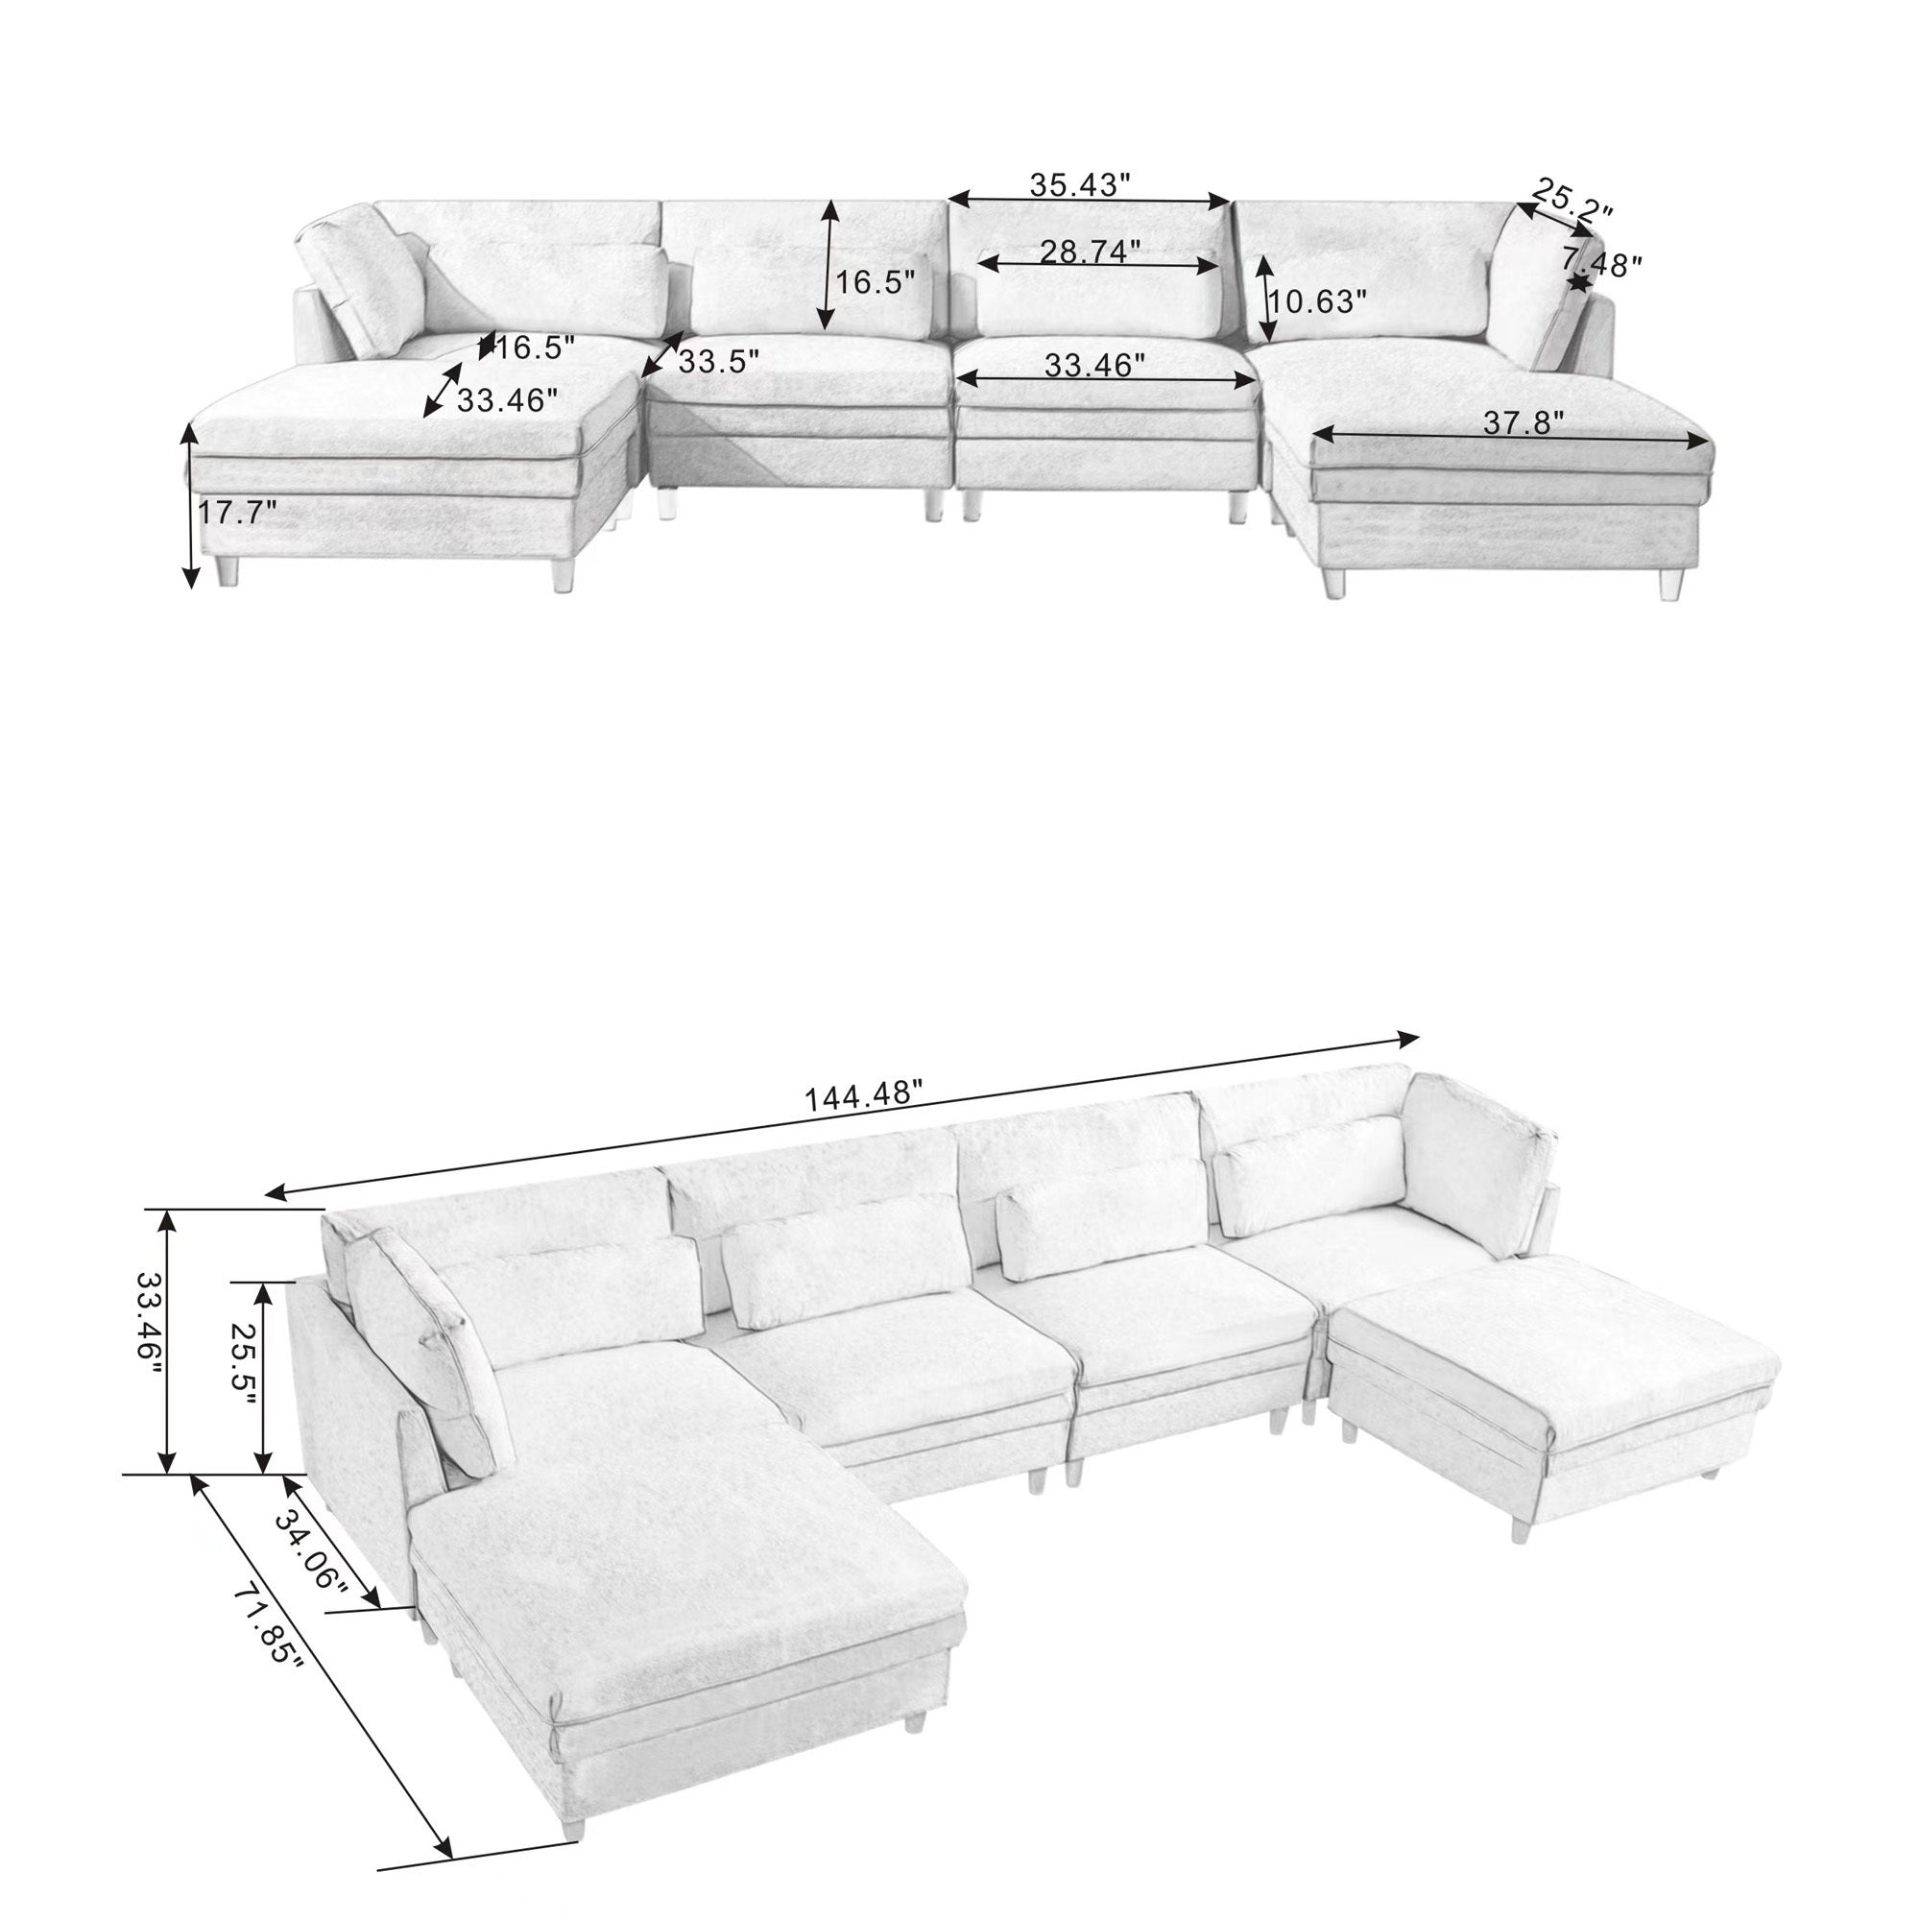 Oversized Modular Sectional Fabric Sofa Set with 6pcs Pillows, Extra Large U Shaped Couch with Reversible Chaise, 145 inch Long, 6 Seat Modular Sofa with  Ottamans, Goodies N Stuff